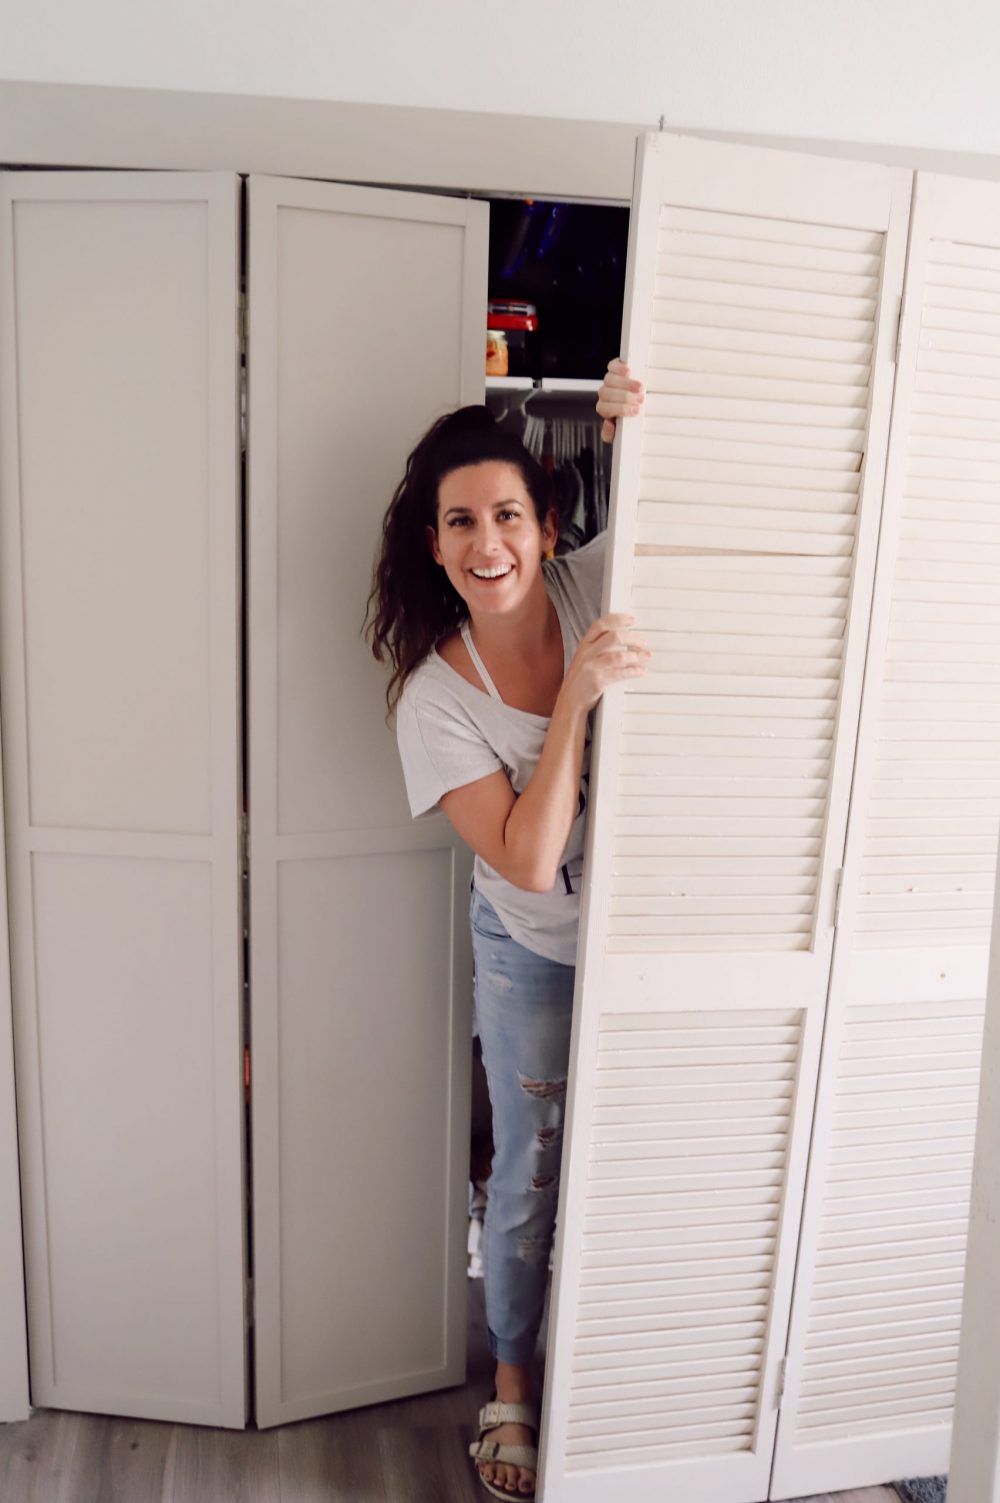 Home Refresh Ideas: DIY Closet Door Upgrade Tutorial. How to update Bi-fold closet doors on a budget. Easy how-to for updating old bifold closet doors and save money (save the hundreds it would cost to replace them!). |DIY Closet Door by popular Florida lifestyle blog, Fresh Mommy Blog: before image of a woman standing in a closet with bifold doors. 